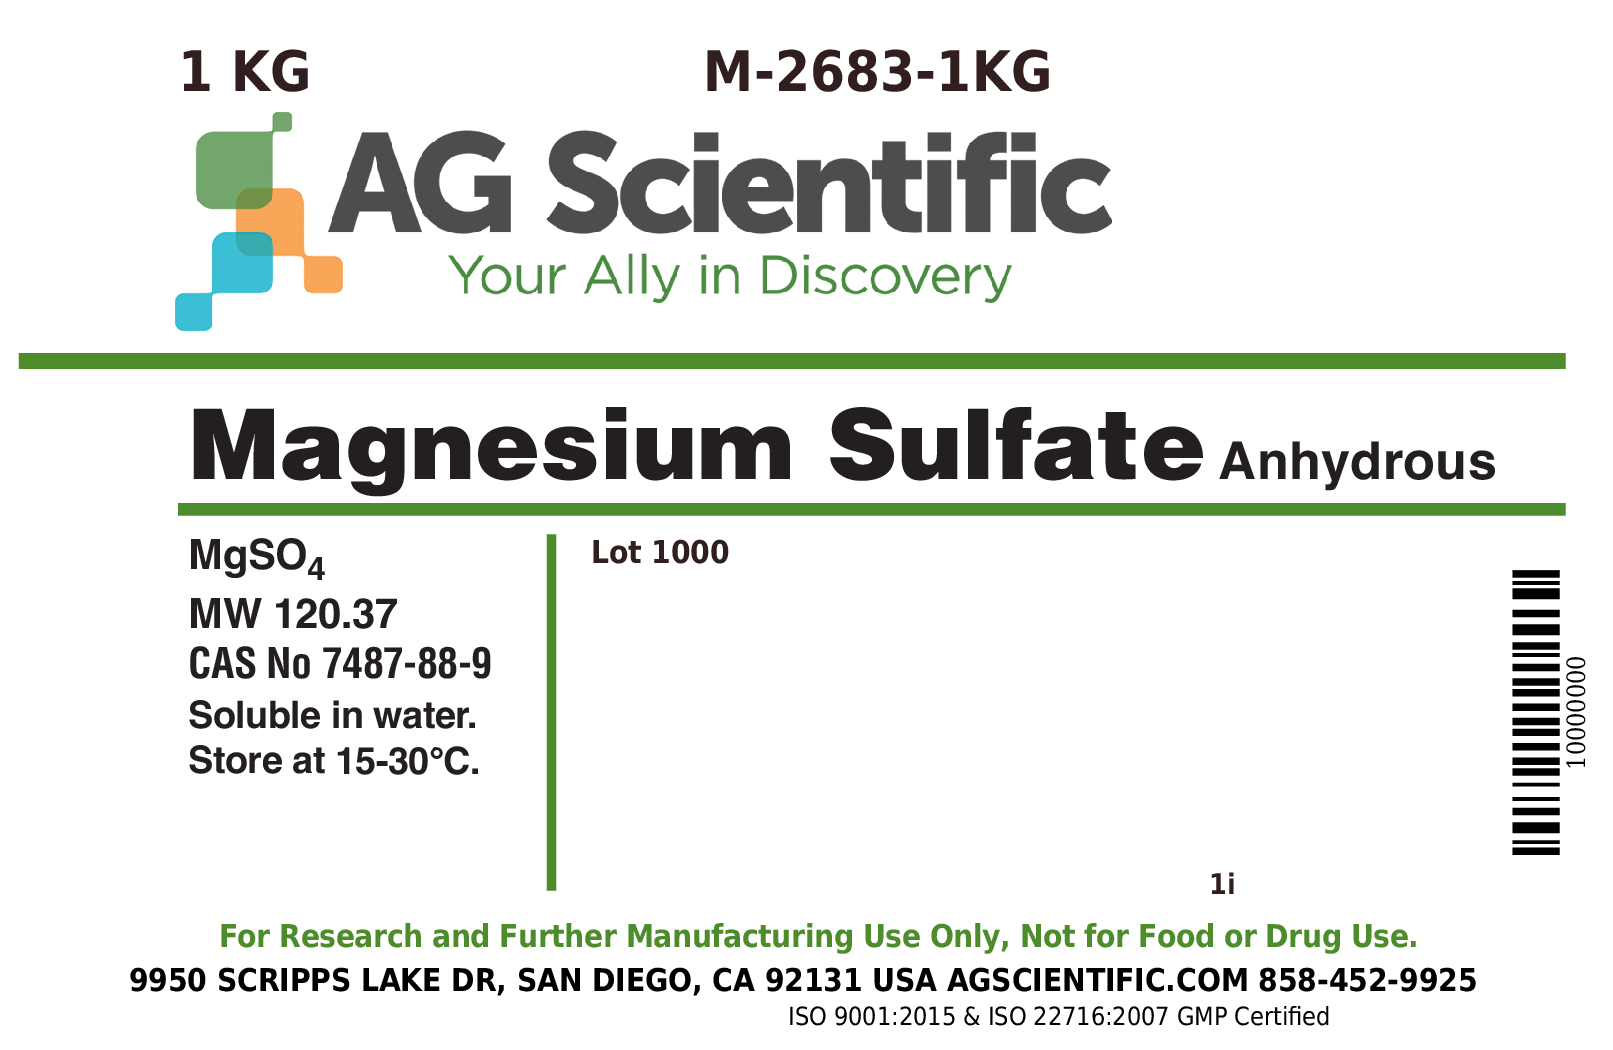 Magnesium Sulfate Anhydrous, 1 KG